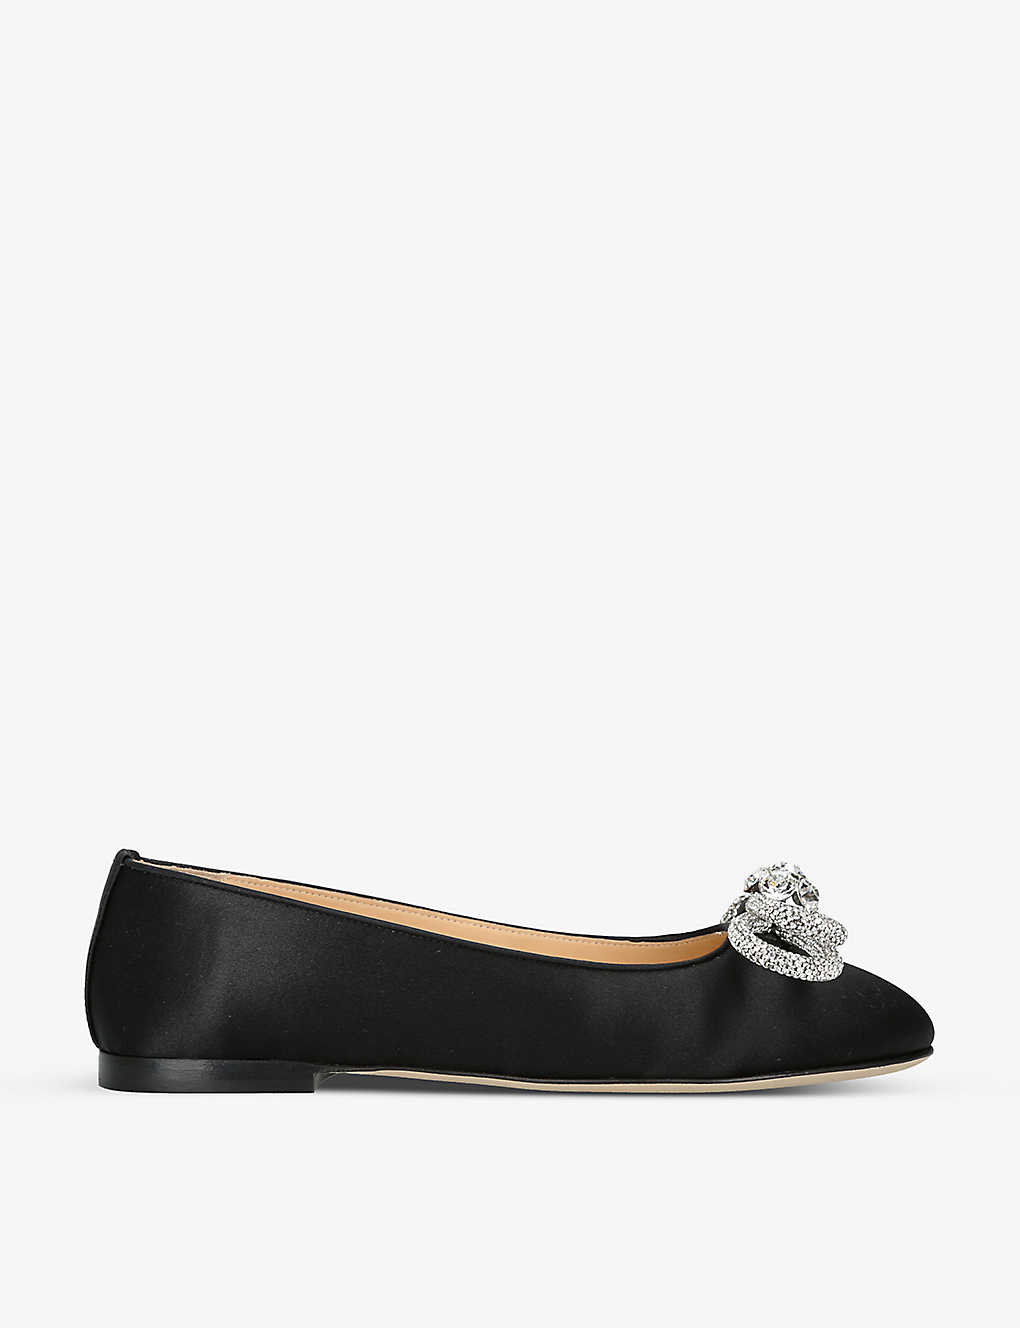 Shop Mach & Mach Women's Black Double Bow Crystal-embellished Satin Courts